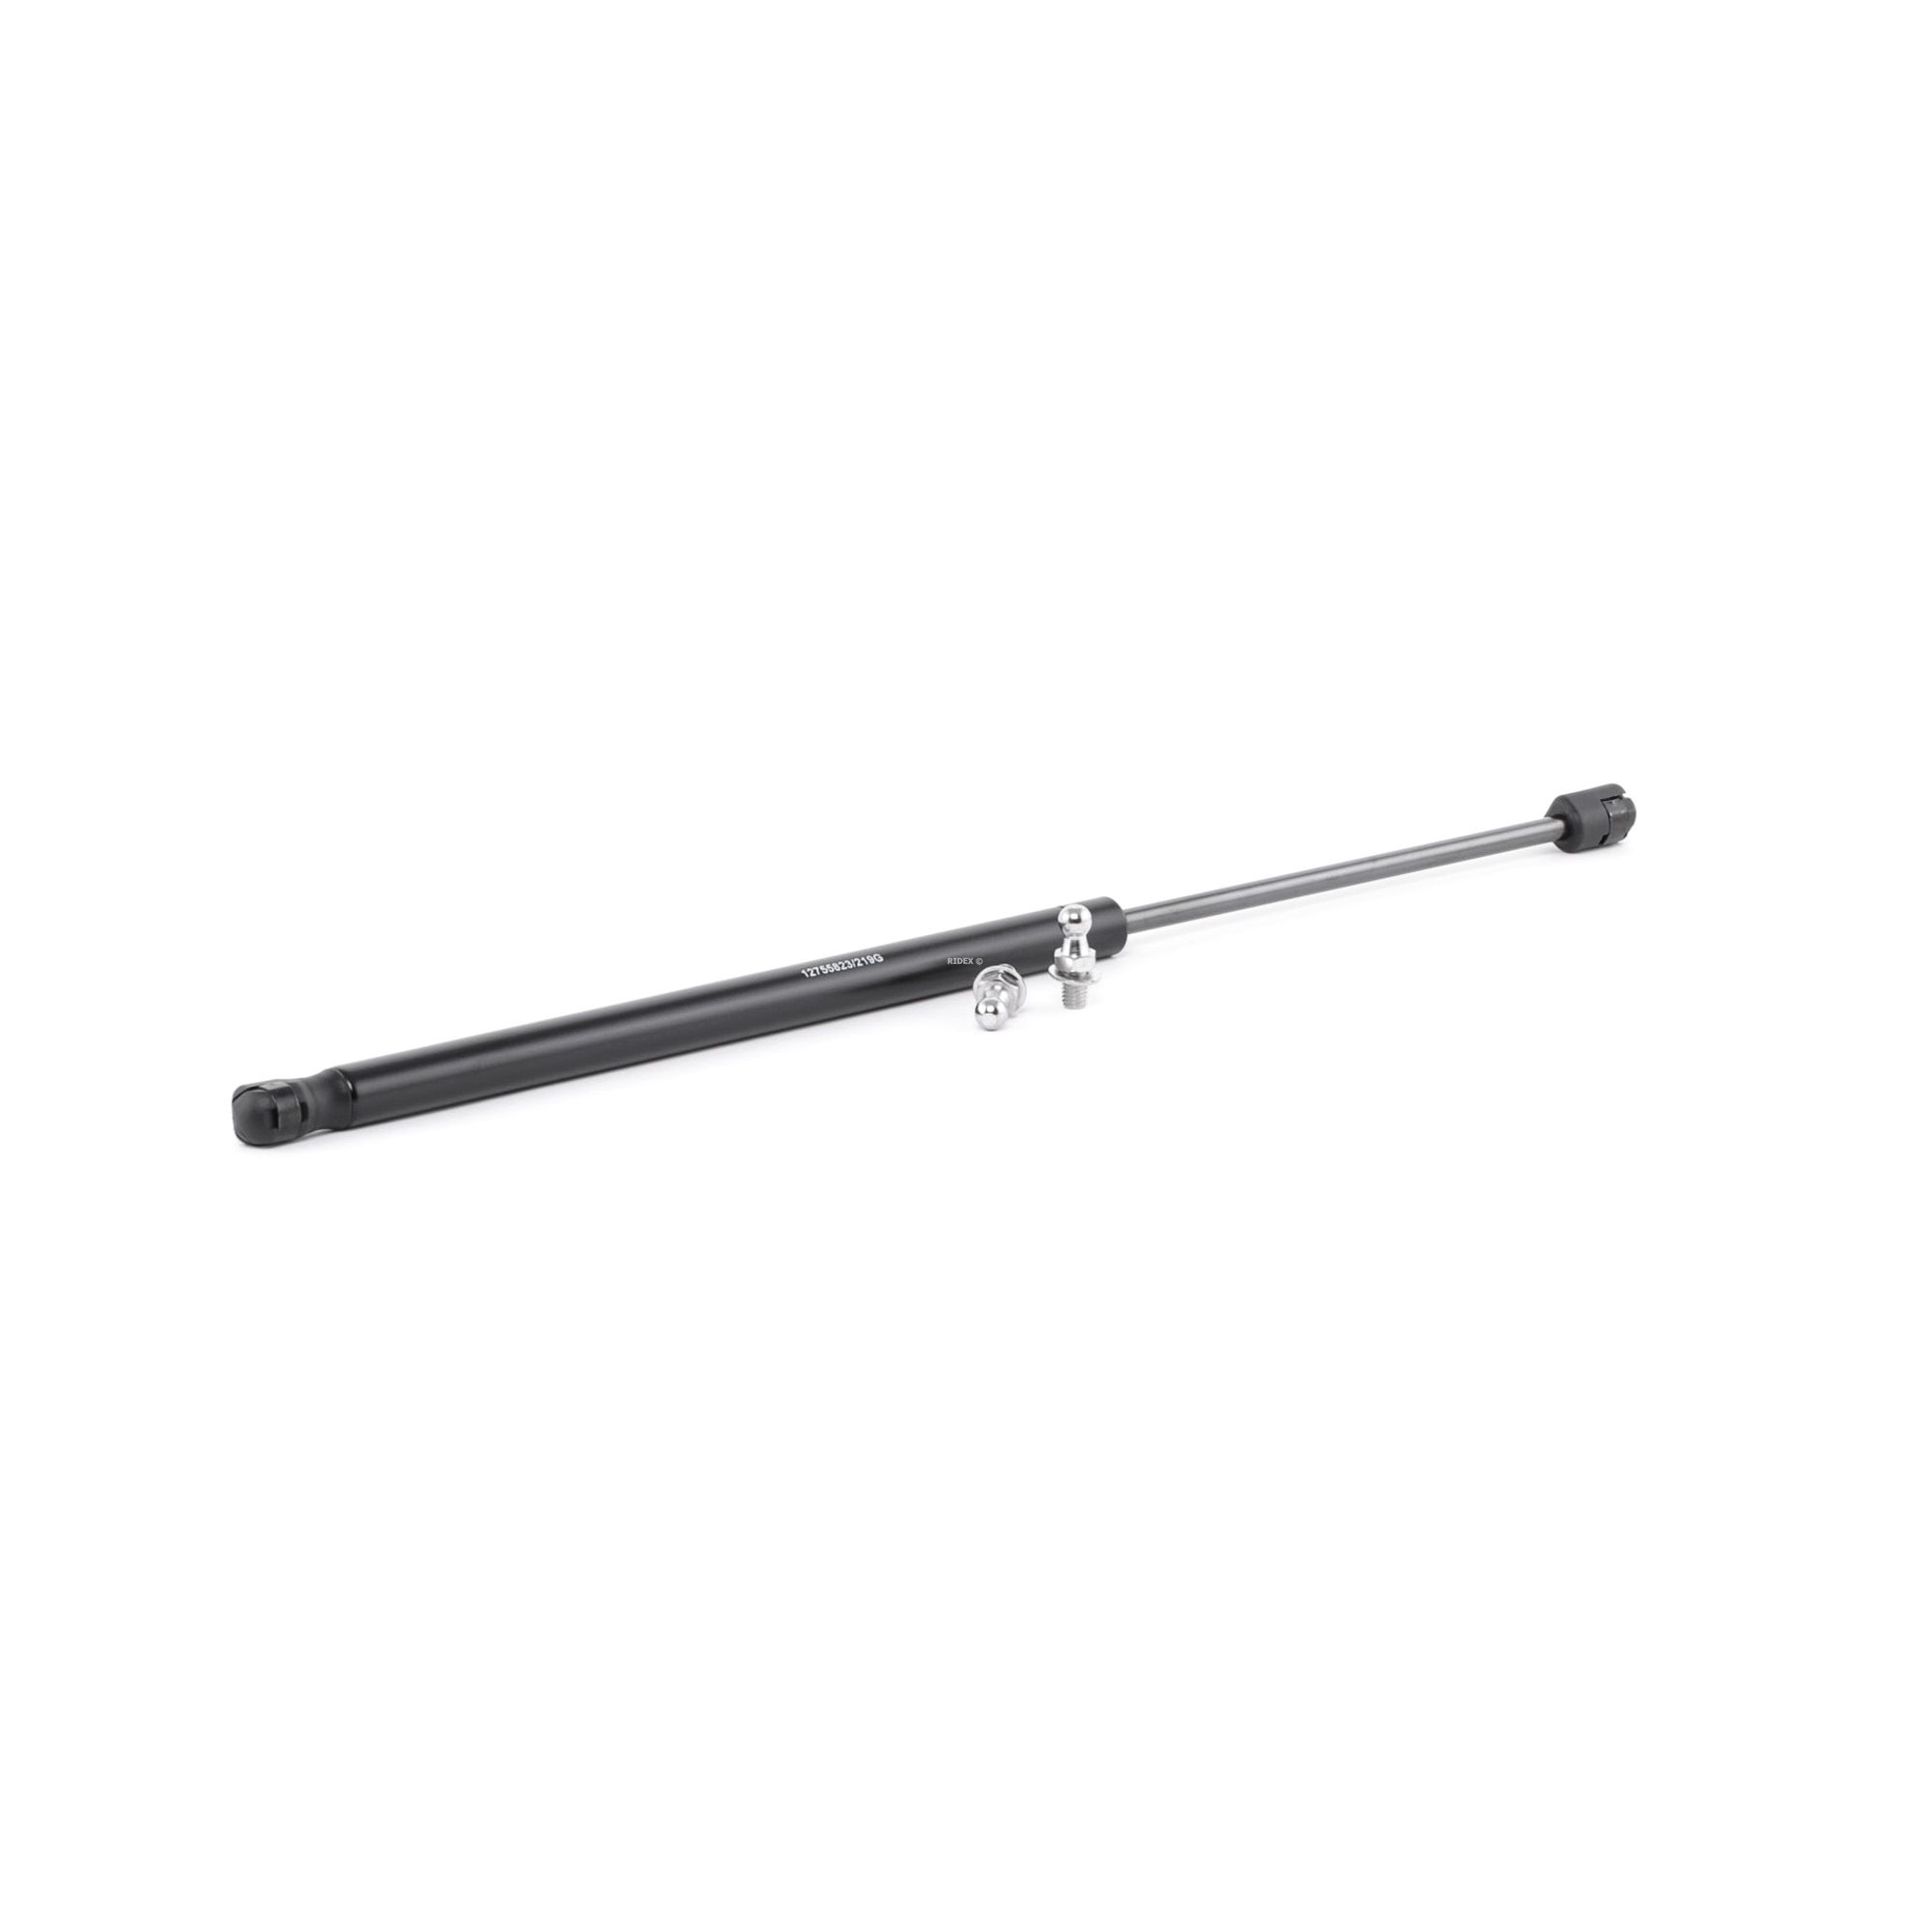 RIDEX 219G0831 Tailgate strut 585N, 508 mm, Rear, both sides, with taper plug